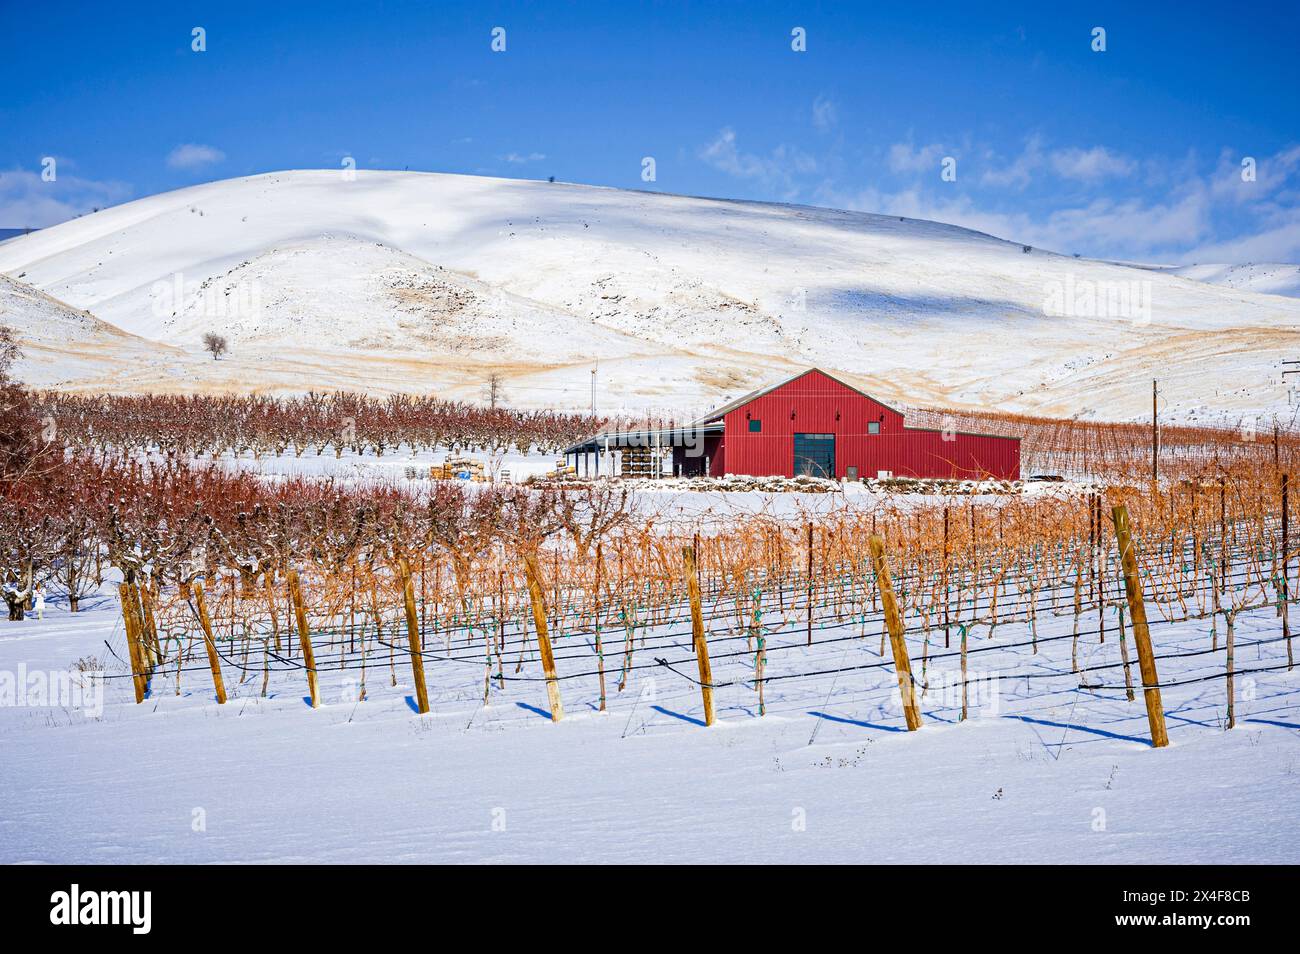 USA, Washington State, Zillah. Winter snow on vineyard and red barn in Yakima Valley. (Editorial Use Only) Stock Photo